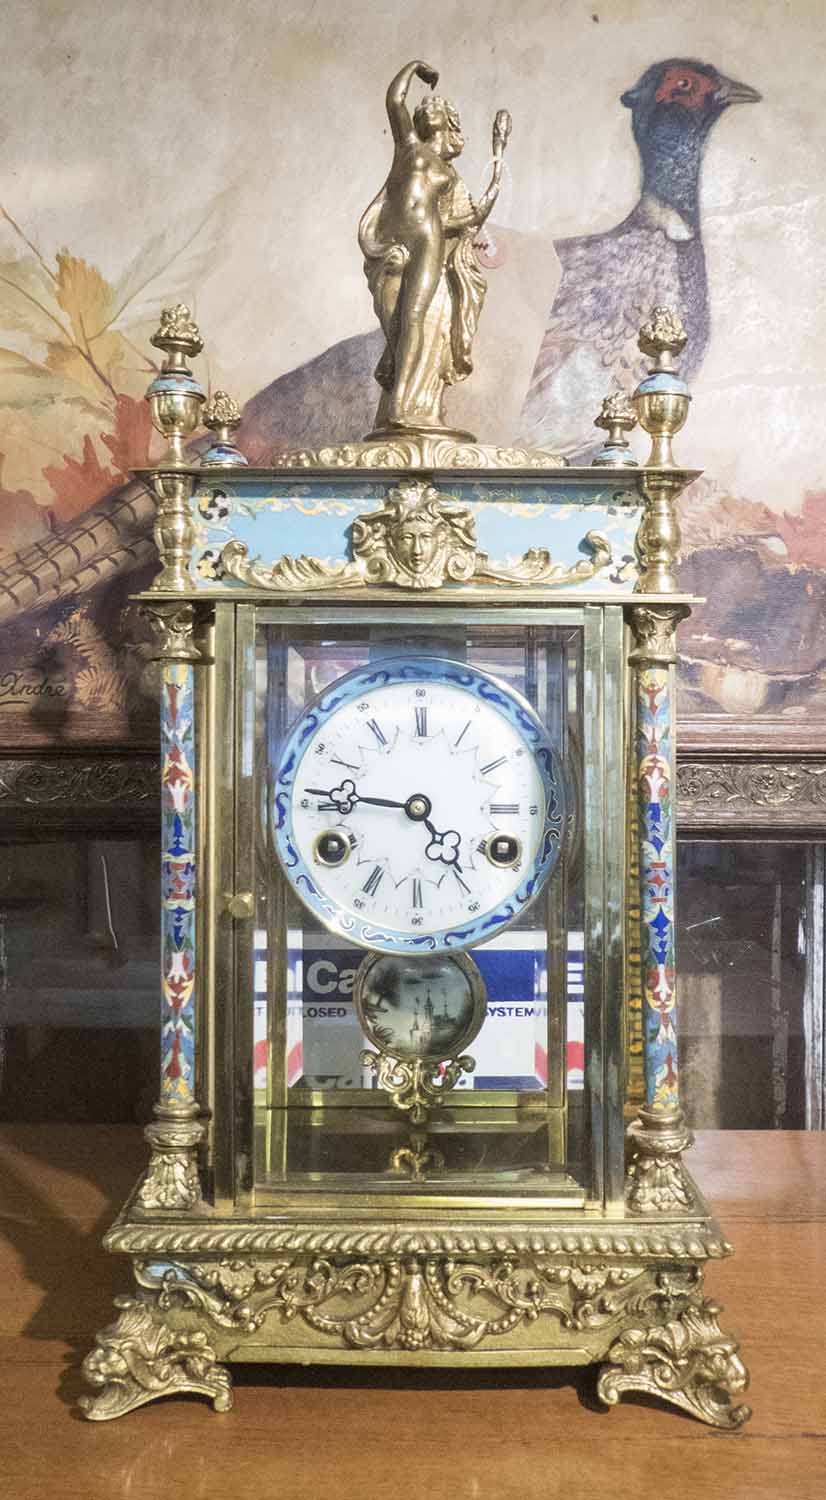 FRENCH MANTEL CLOCK late 19th century, with decorative gilt,